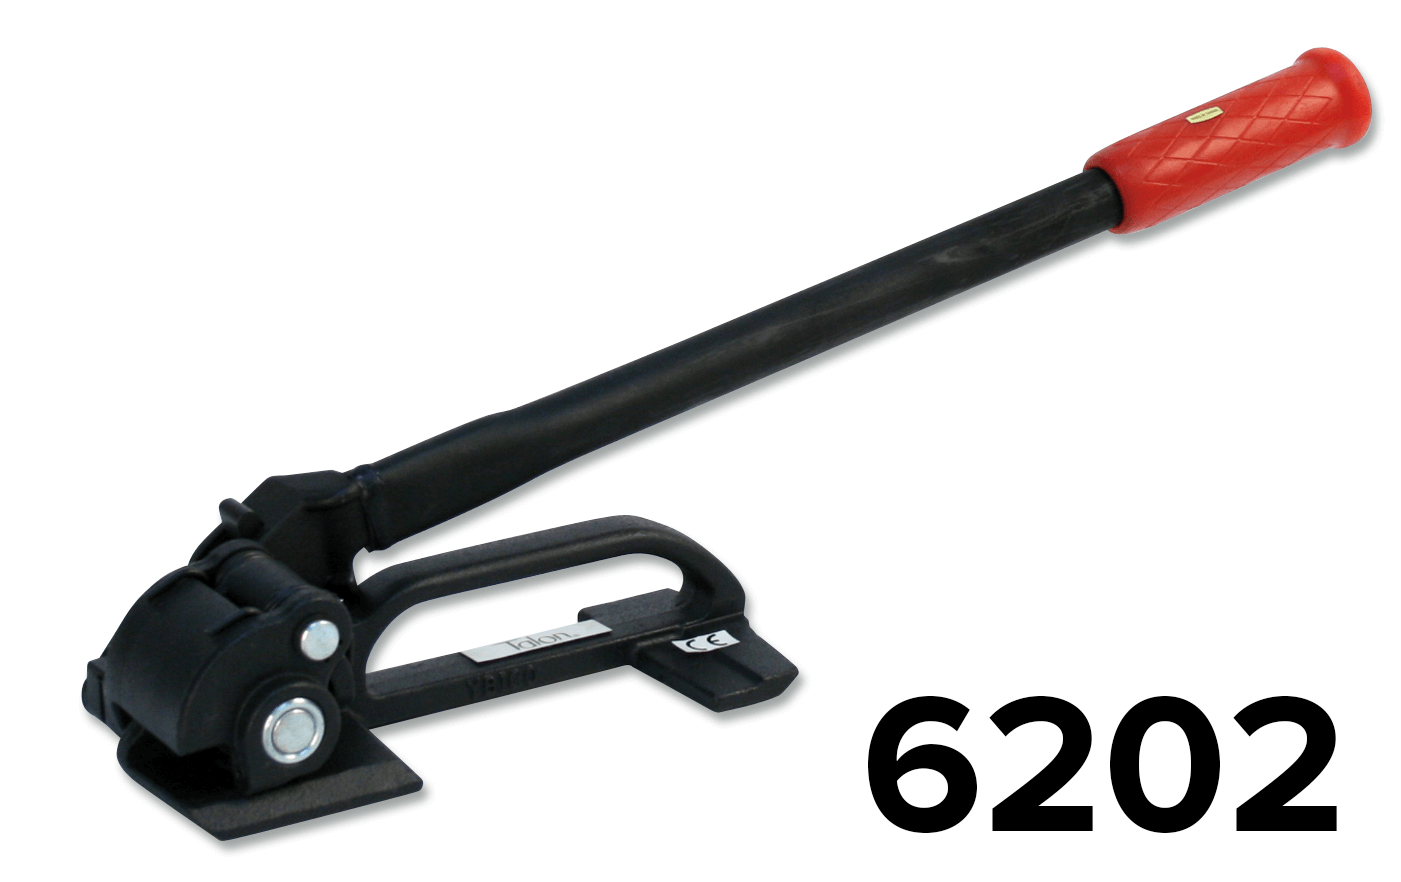 6202 steel strap tensioner S298 product image